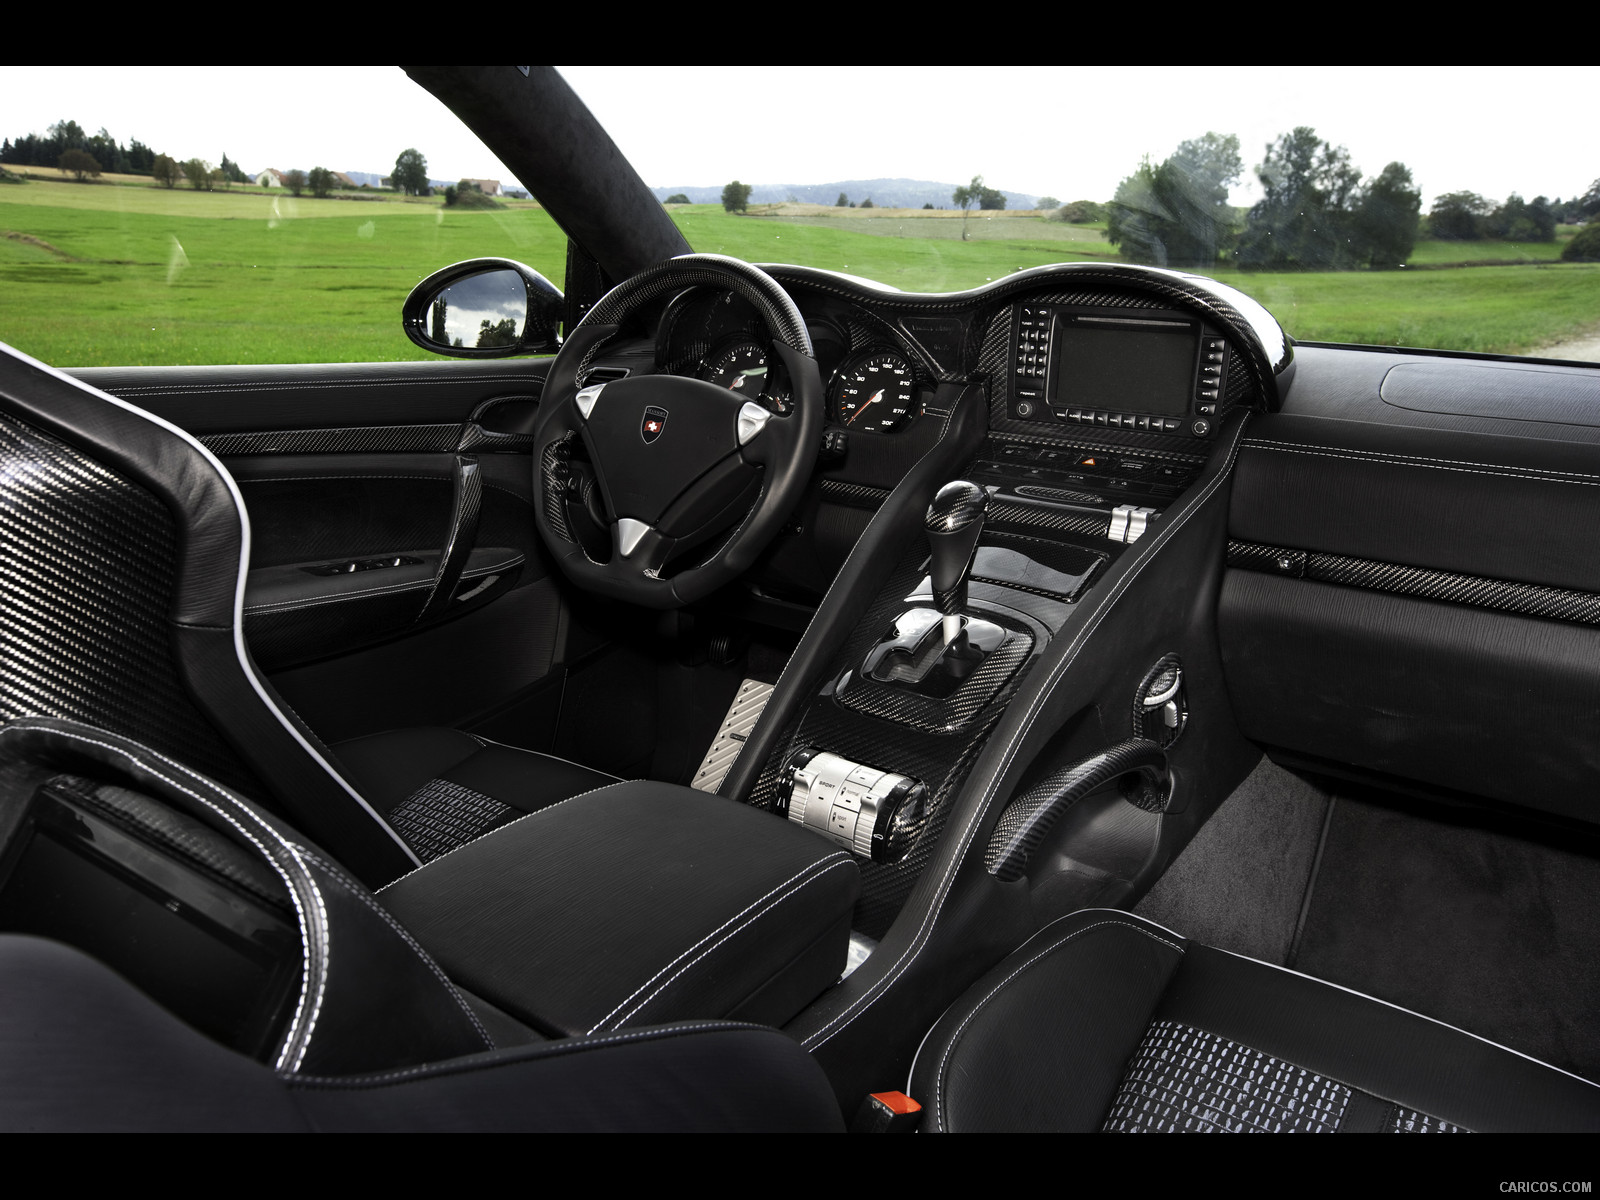 2009 Mansory Chopster based on Porsche Cayenne Turbo S  - Interior, #25 of 38